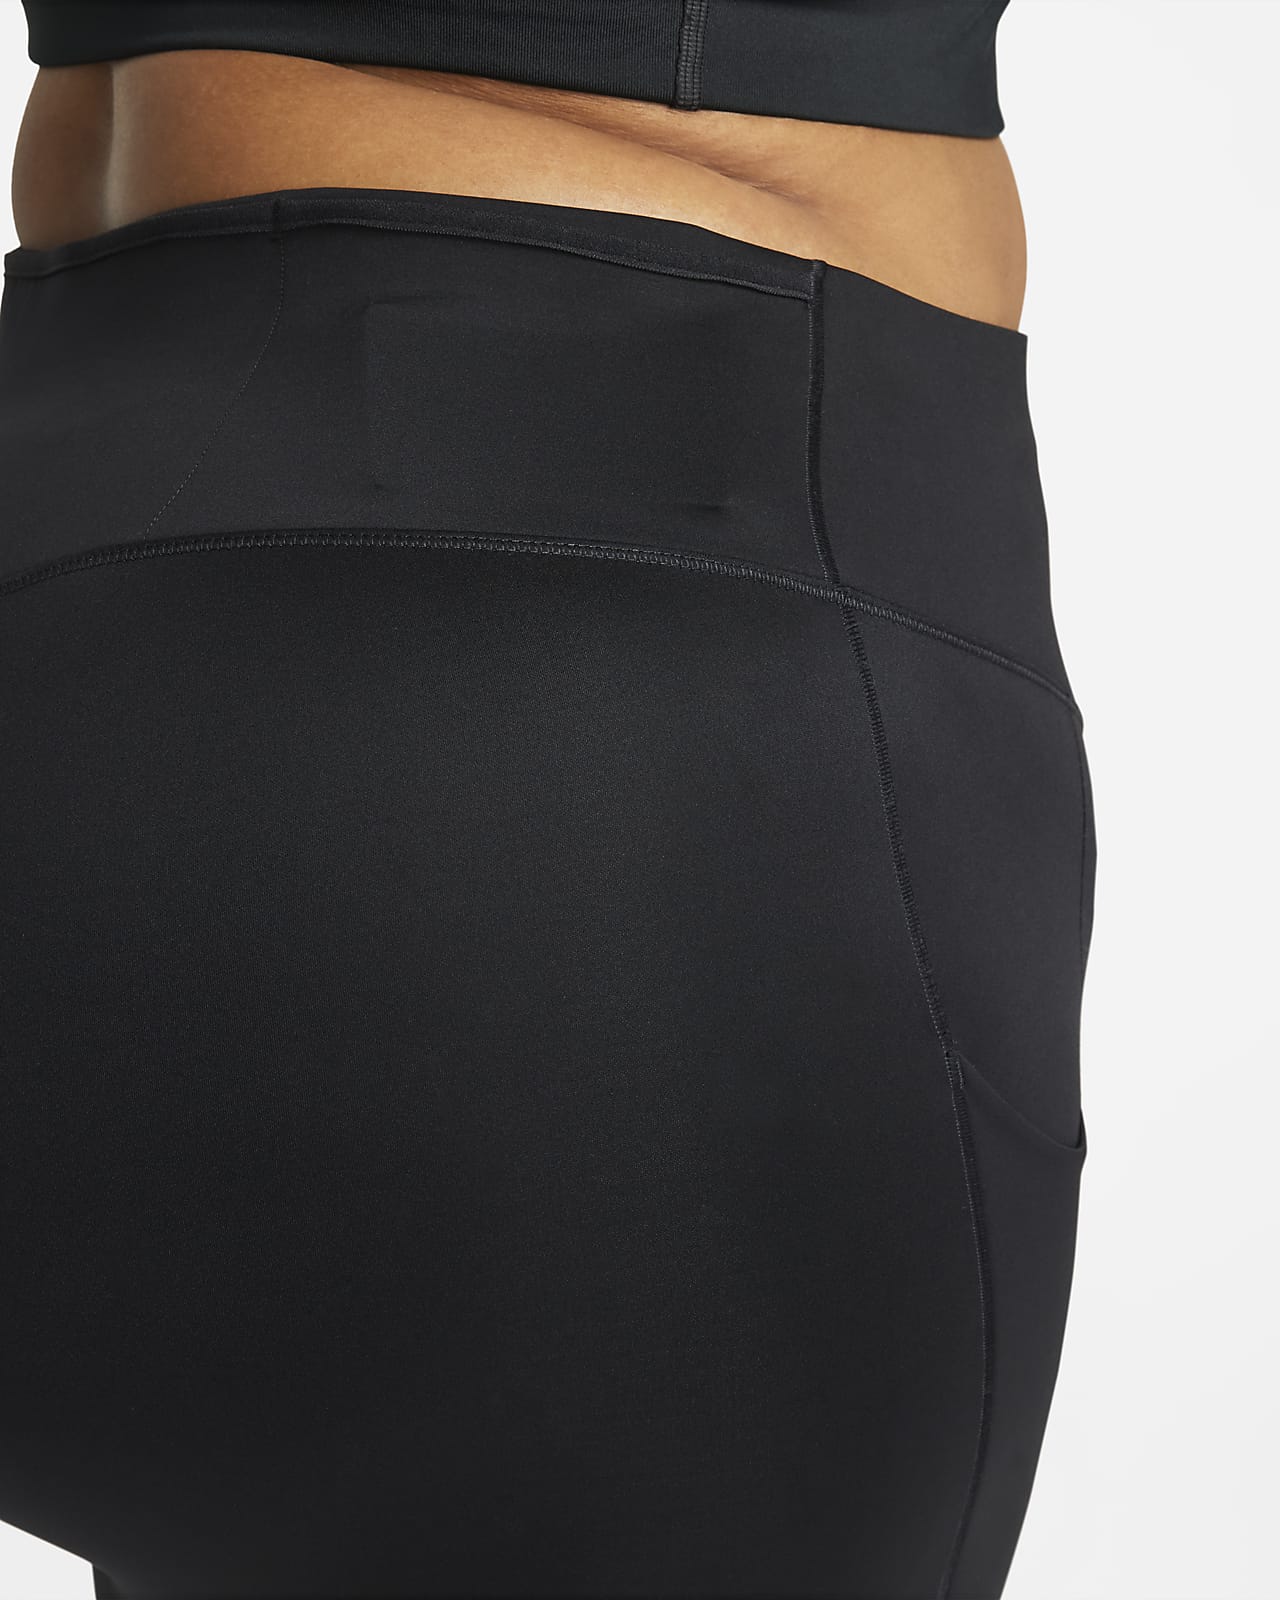 Nike Go Women's Firm-Support High-Waisted 7/8 Leggings with Pockets (Plus  Size). Nike CA